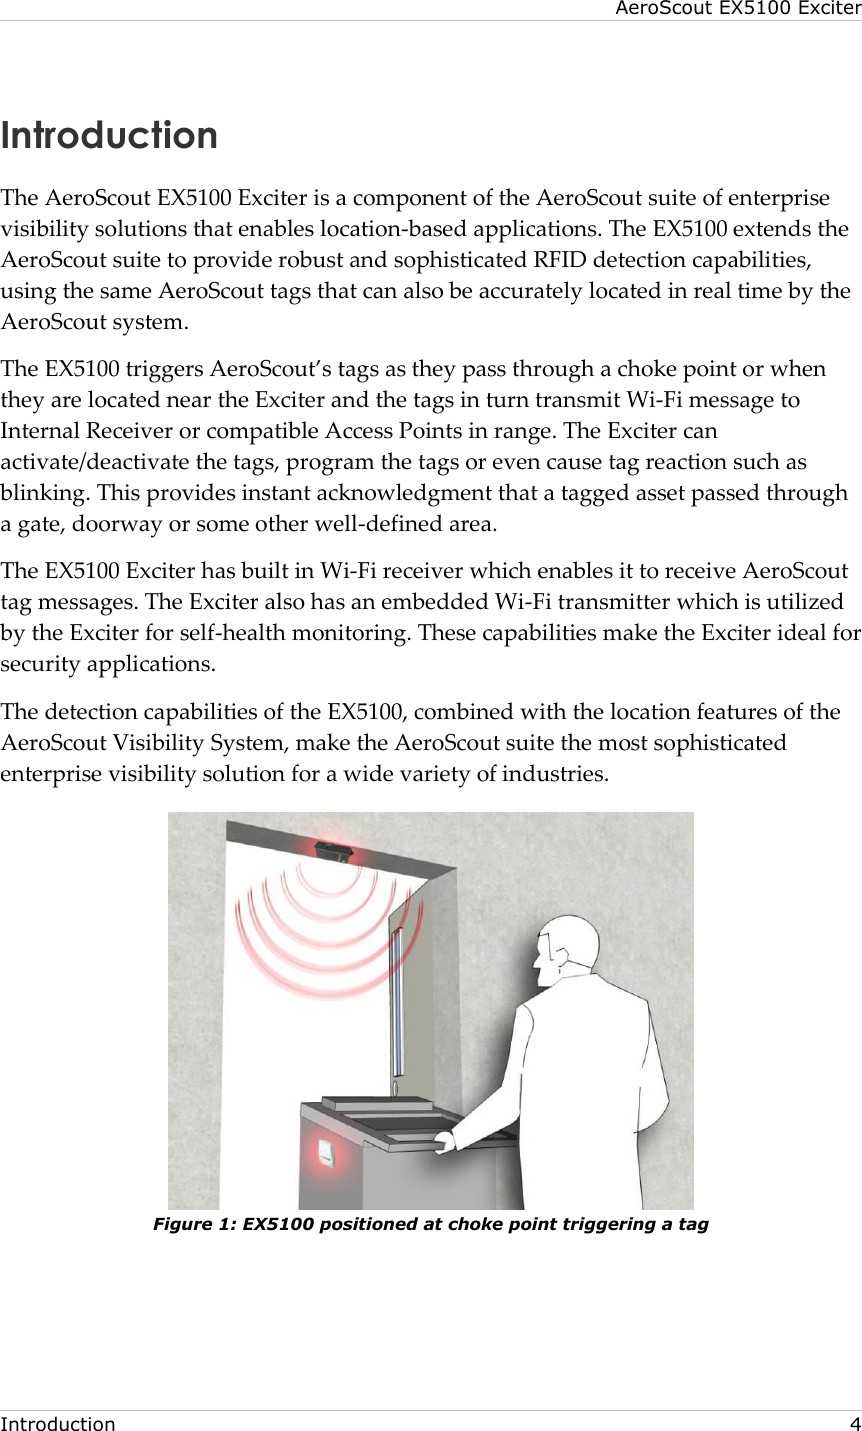 AeroScout EX5100 Exciter  Introduction     4 Introduction The AeroScout EX5100 Exciter is a component of the AeroScout suite of enterprise visibility solutions that enables location-based applications. The EX5100 extends the AeroScout suite to provide robust and sophisticated RFID detection capabilities, using the same AeroScout tags that can also be accurately located in real time by the AeroScout system. The EX5100 triggers AeroScout’s tags as they pass through a choke point or when they are located near the Exciter and the tags in turn transmit Wi-Fi message to Internal Receiver or compatible Access Points in range. The Exciter can activate/deactivate the tags, program the tags or even cause tag reaction such as blinking. This provides instant acknowledgment that a tagged asset passed through a gate, doorway or some other well-defined area.  The EX5100 Exciter has built in Wi-Fi receiver which enables it to receive AeroScout tag messages. The Exciter also has an embedded Wi-Fi transmitter which is utilized by the Exciter for self-health monitoring. These capabilities make the Exciter ideal for security applications. The detection capabilities of the EX5100, combined with the location features of the AeroScout Visibility System, make the AeroScout suite the most sophisticated enterprise visibility solution for a wide variety of industries.  Figure 1: EX5100 positioned at choke point triggering a tag  